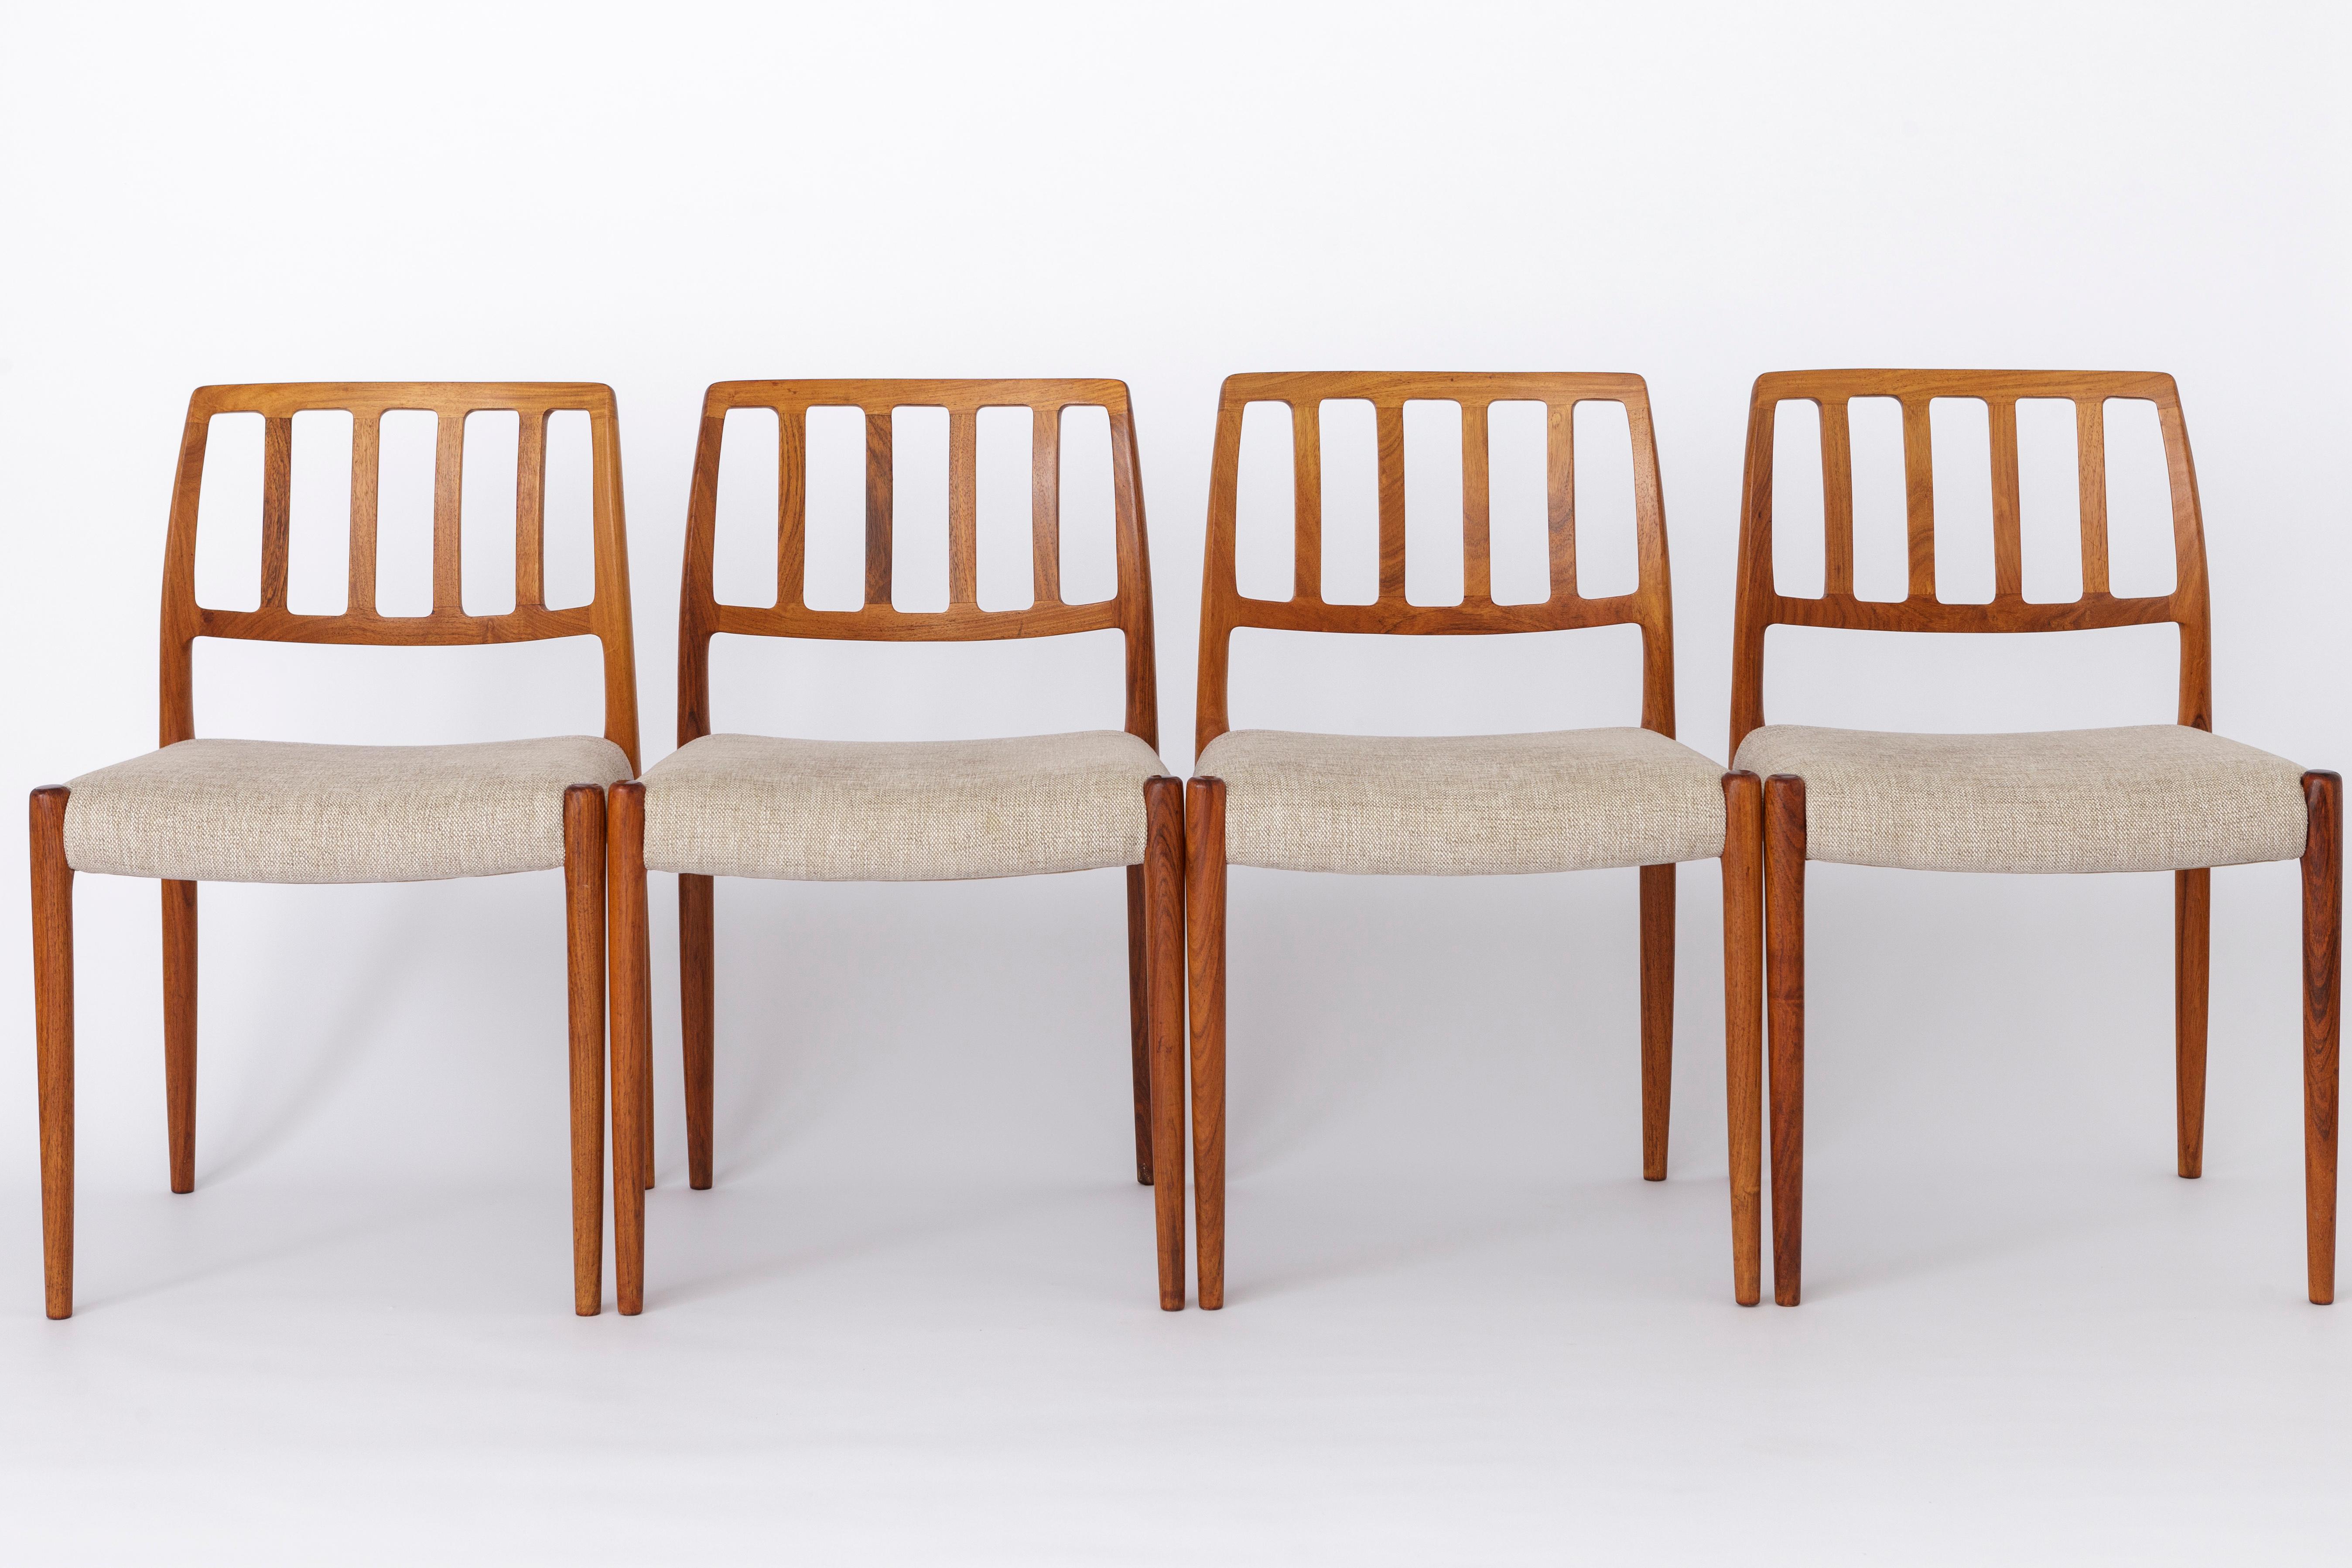 Set of 4 Niels Otto Moller chairs. 
Model: 83 from the 1970s in version rosewood. 
Displayed price is for a set of 4. 

Very good condition. Sturdy rosewood chair frame. Refurbished and oiled. 
Reupholstered with light grey textile seat cover (at a